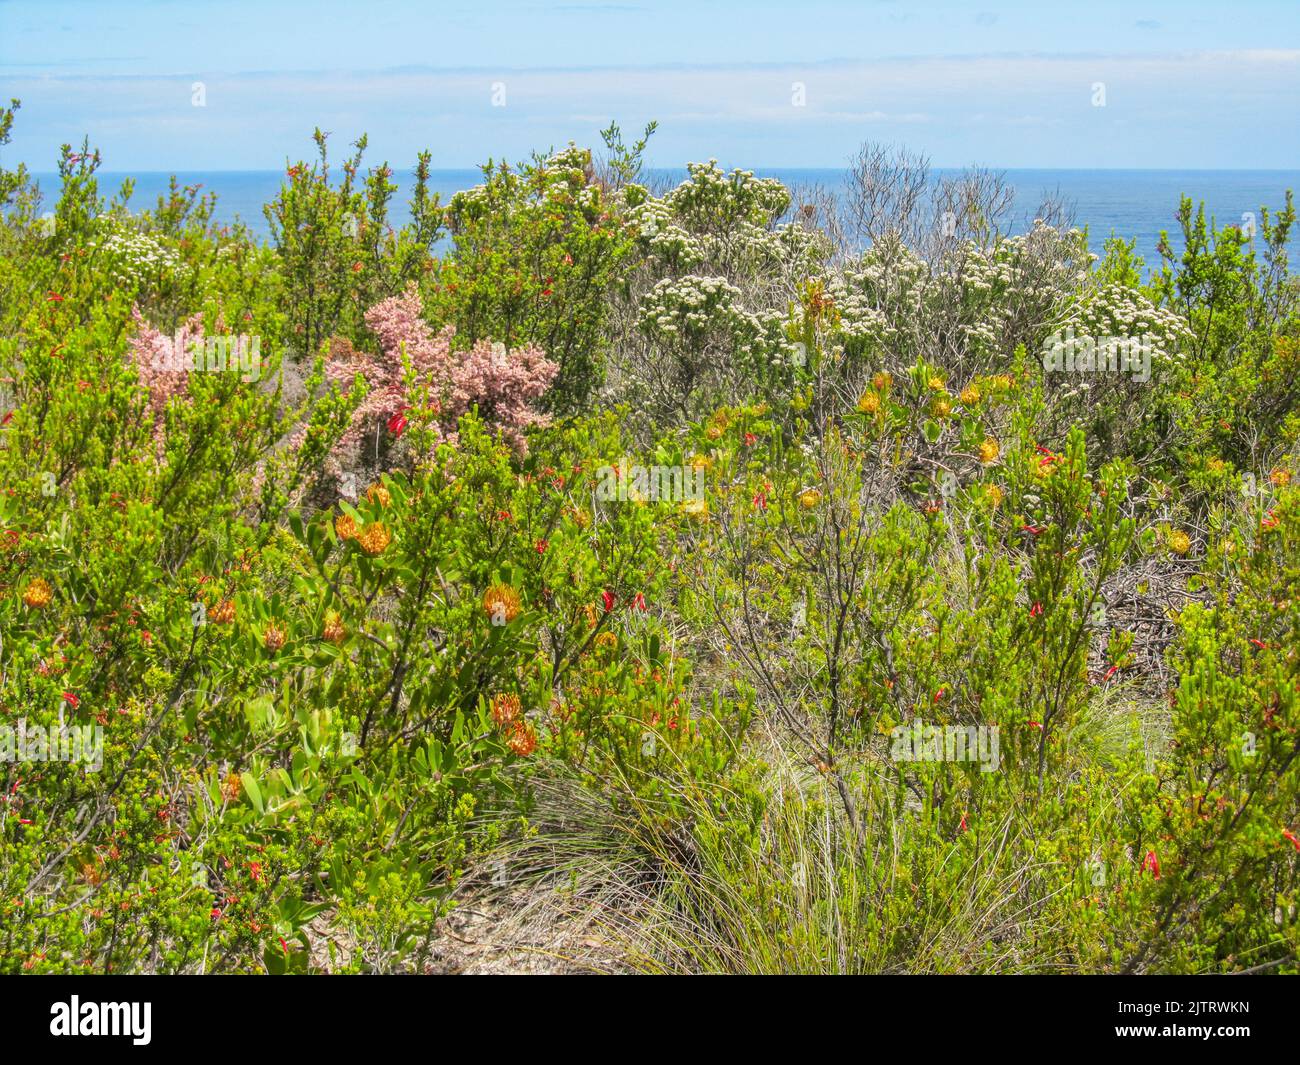 Fynbos in full bloom in the summer along the Tsitsikamma Coastline of South Africa. Stock Photo